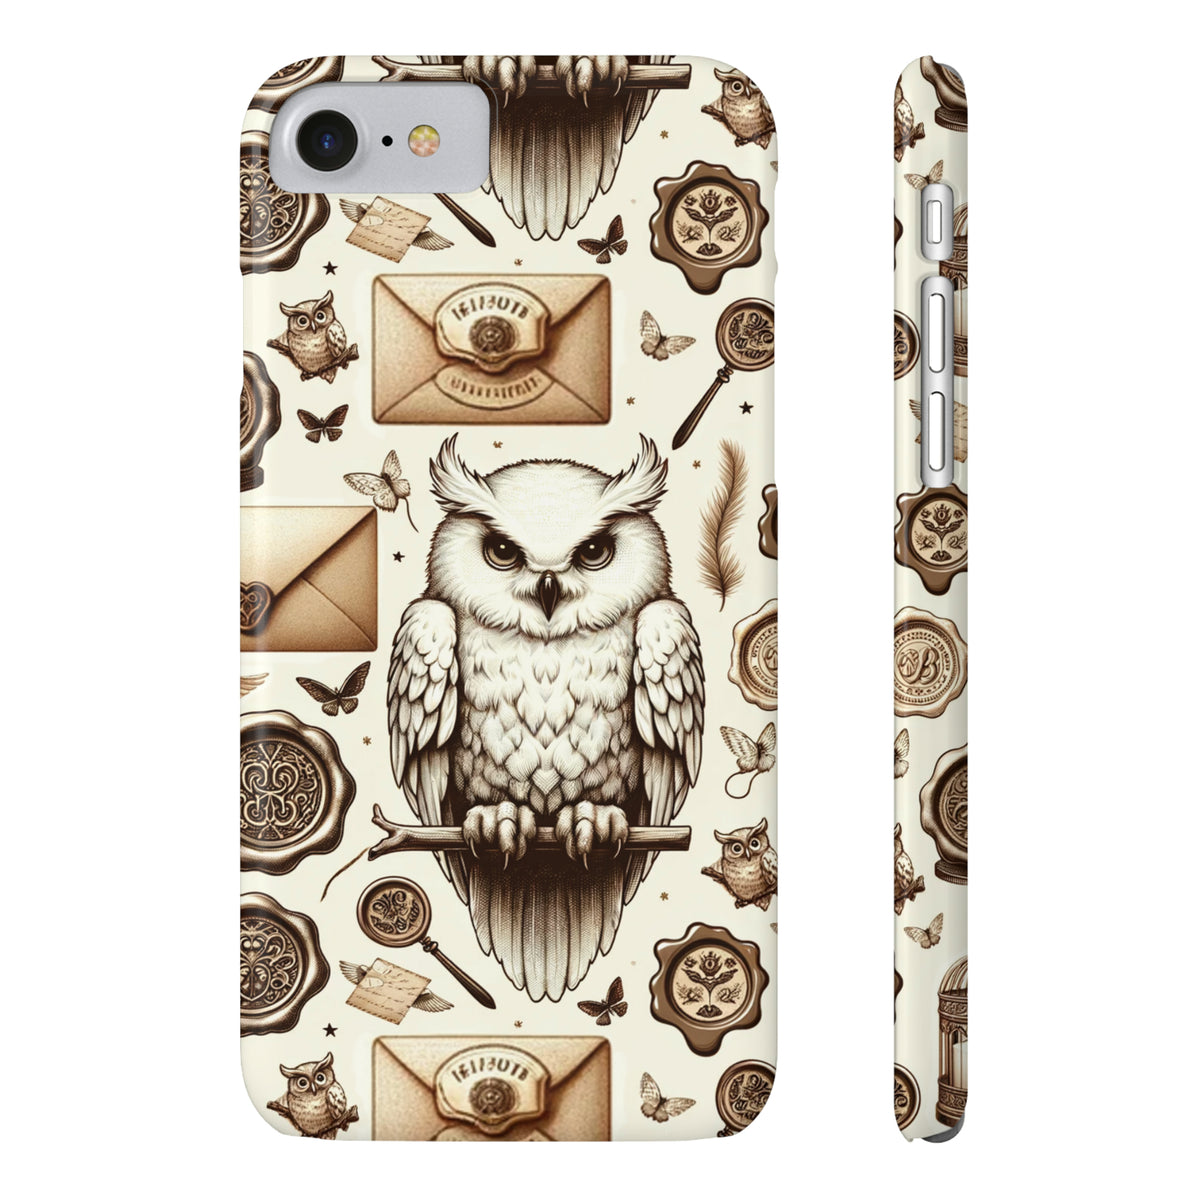 Magical Owl with Retro Vibes Wizard Phone Case